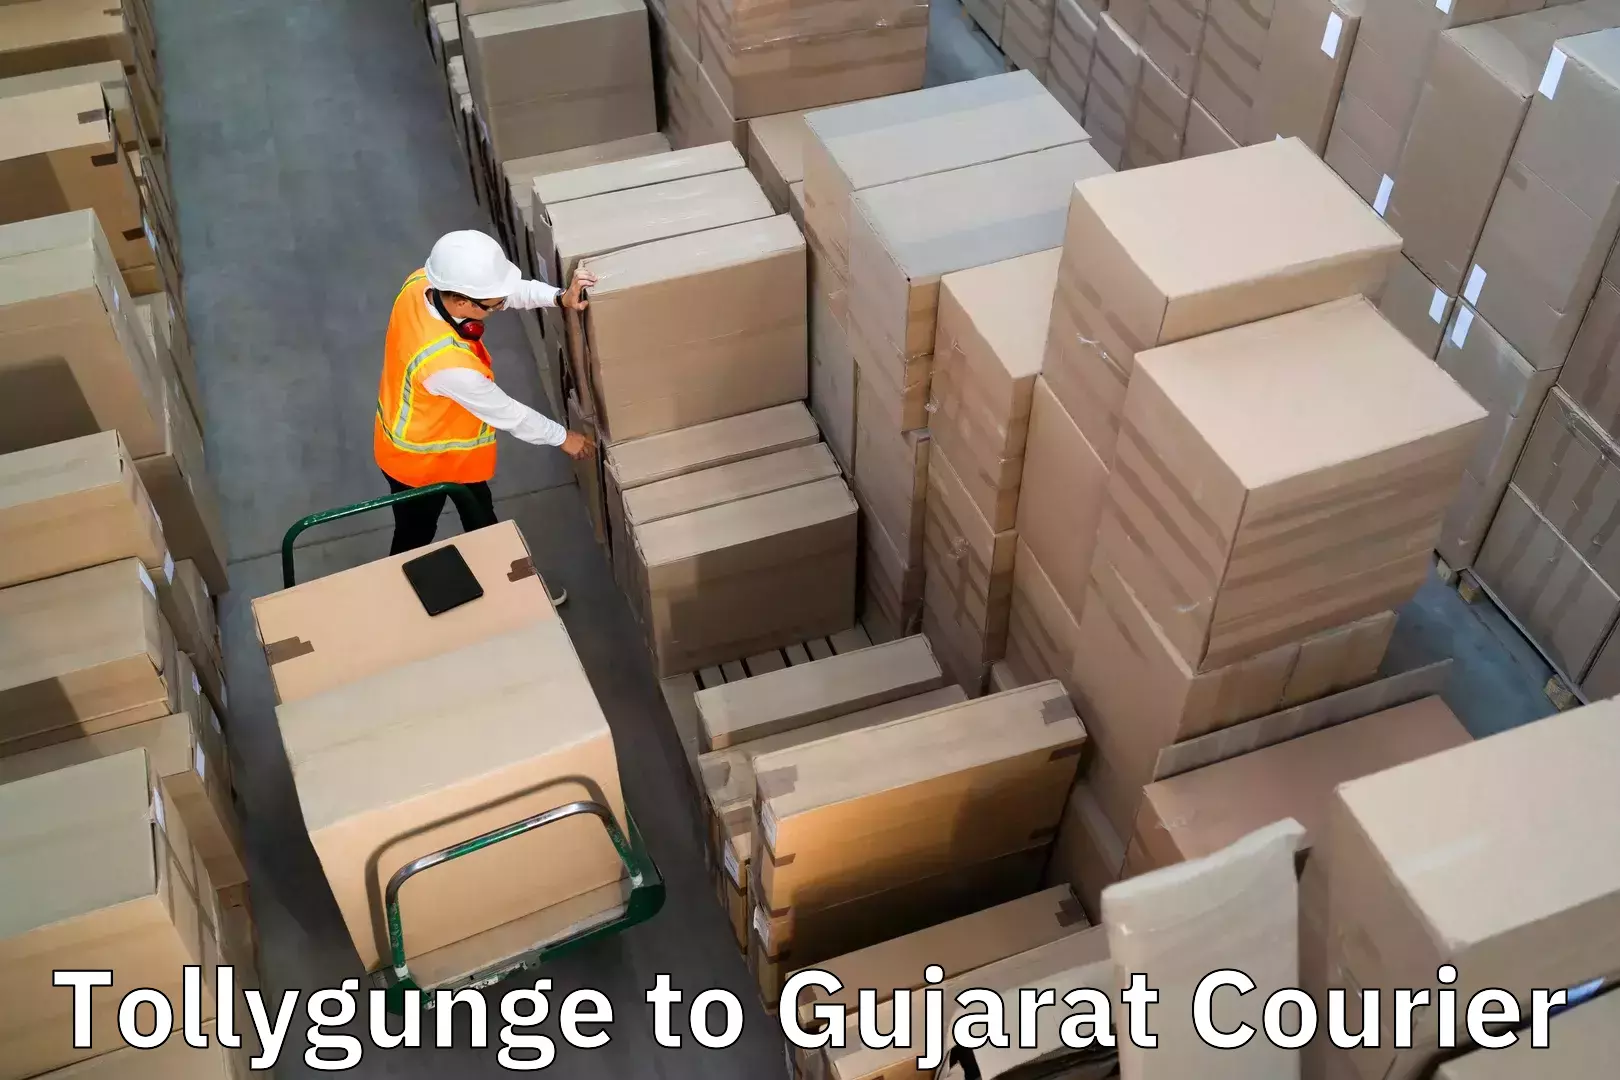 Luggage transport company Tollygunge to Halvad